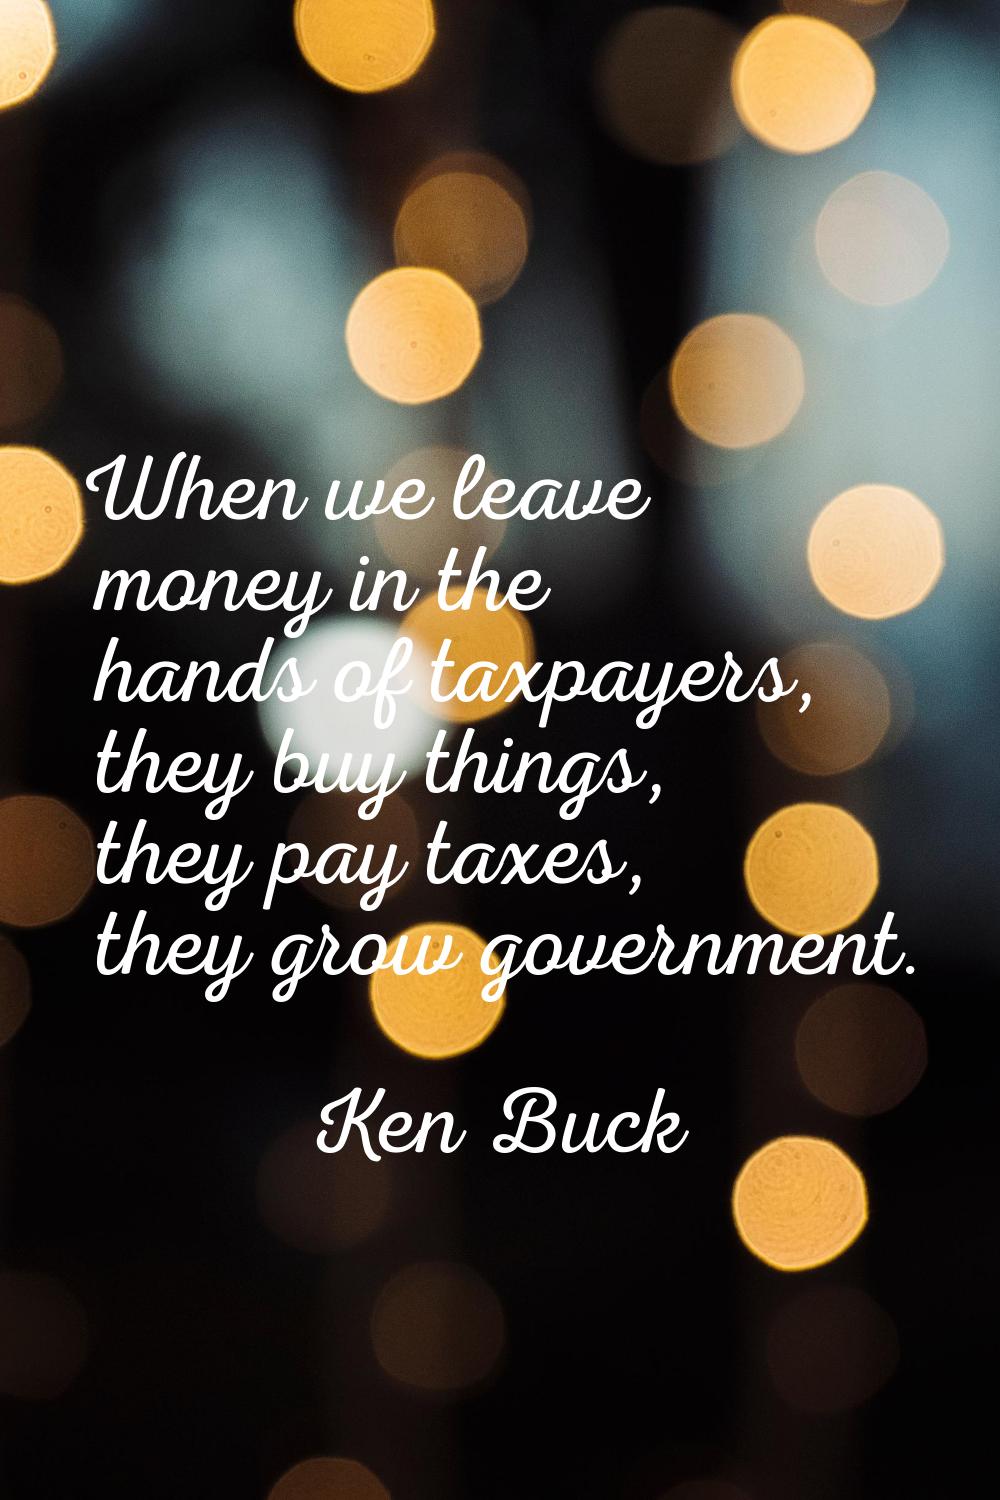 When we leave money in the hands of taxpayers, they buy things, they pay taxes, they grow governmen